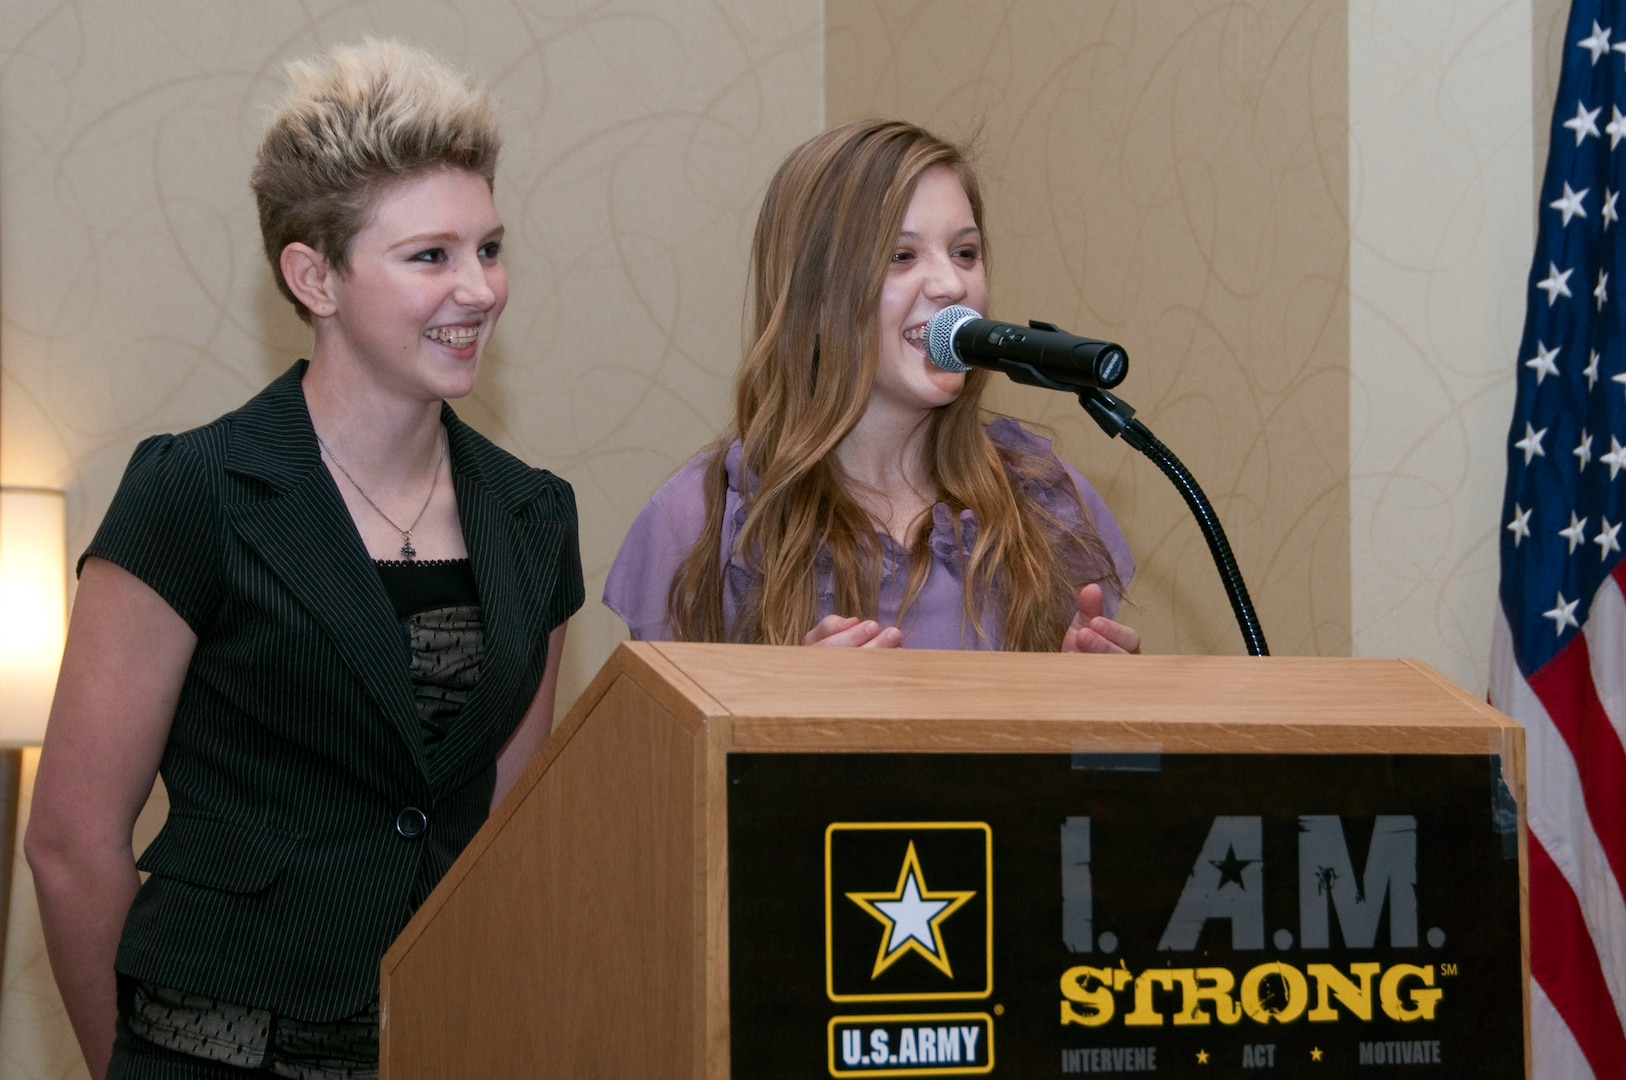 Moranda Hern, 17, and Kaylei Deakin, 16, discuss their experiences as daughters of California National Guardsmen during the Adjutant General's Symposium on Family Readiness in Burlingame, Calif., earlier this year. The two girls plan to hold a conference for the daughters of California Guardsmen next year.